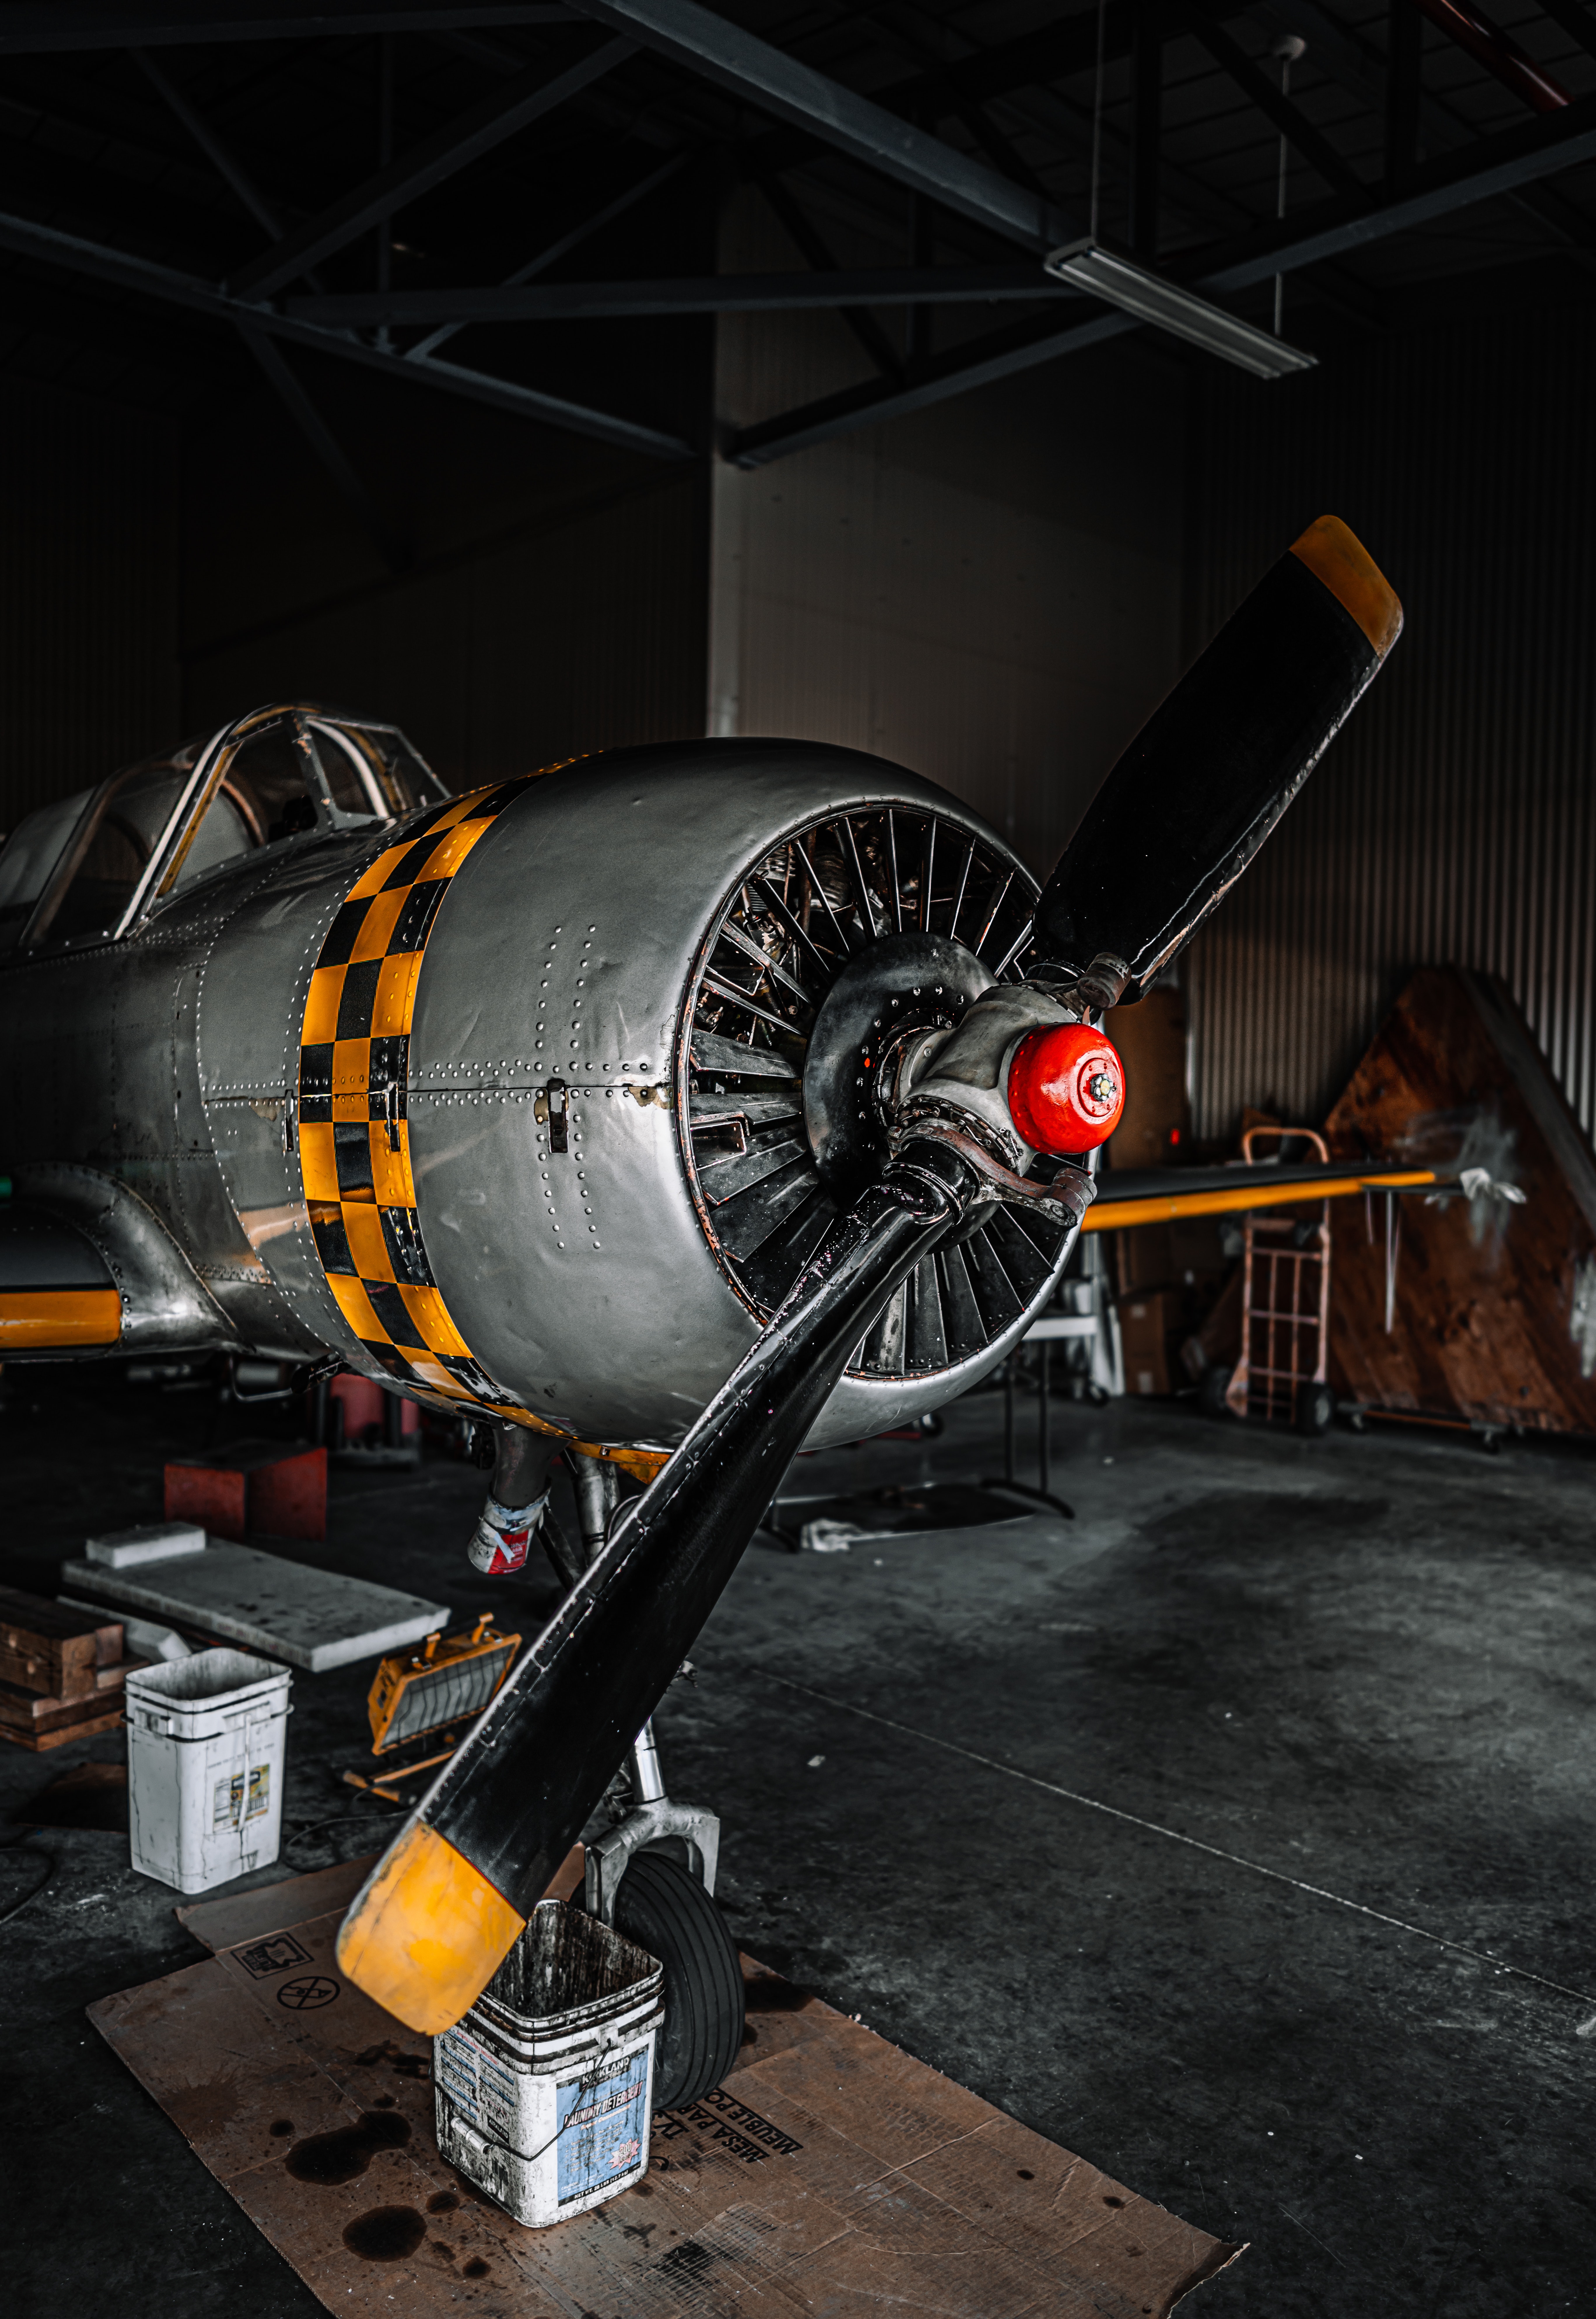 Fixed wing airplane parked in hangar for repairing · Free